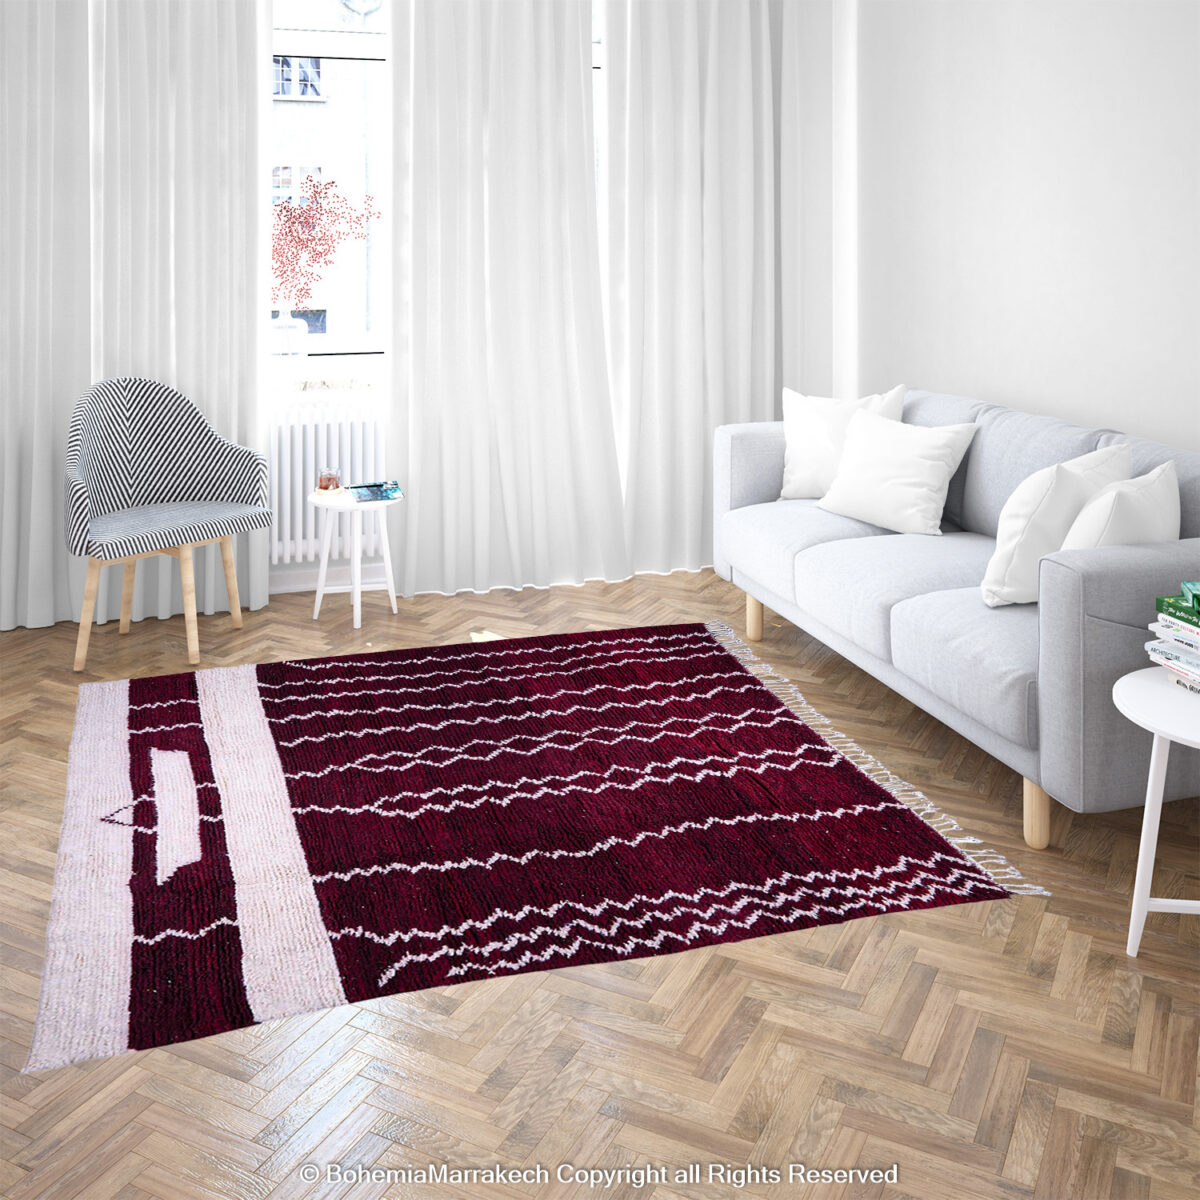 10 x 11 rug beautiful area rugs 9 x 7 rug bright blue rug 10 by 10 area rugs red throw rugs cheap wool rugs 5 x 9 rug 7 by 9 area rugs at home carpets large blue area rug best deal on rugs large colorful rug 7 by 10 area rugs 8 x 10 carpets rugs in store rug colorful moroccan berber carpet 8 ft by 10 ft rug vintage style area rugs vintage looking area rugs 8 ft rug modern rug for bedroom best wool rug 9 x 5 rug x large area rugs giant rugs cheap colorful large rug 8 by 10 ft rug discounted area rugs near me discount shag rugs big colorful rug 10 x 11 carpet second hand area rugs large wool carpet colorful 5x7 rug 10 area rugs modern rugs bedroom huge cheap rug 10 by 7 area rug 5 x 9 carpet cheap huge rug red big rug huge red rug beni ourain morocco rug buy area rugs custom wool rugs tuareg mat best berber carpet